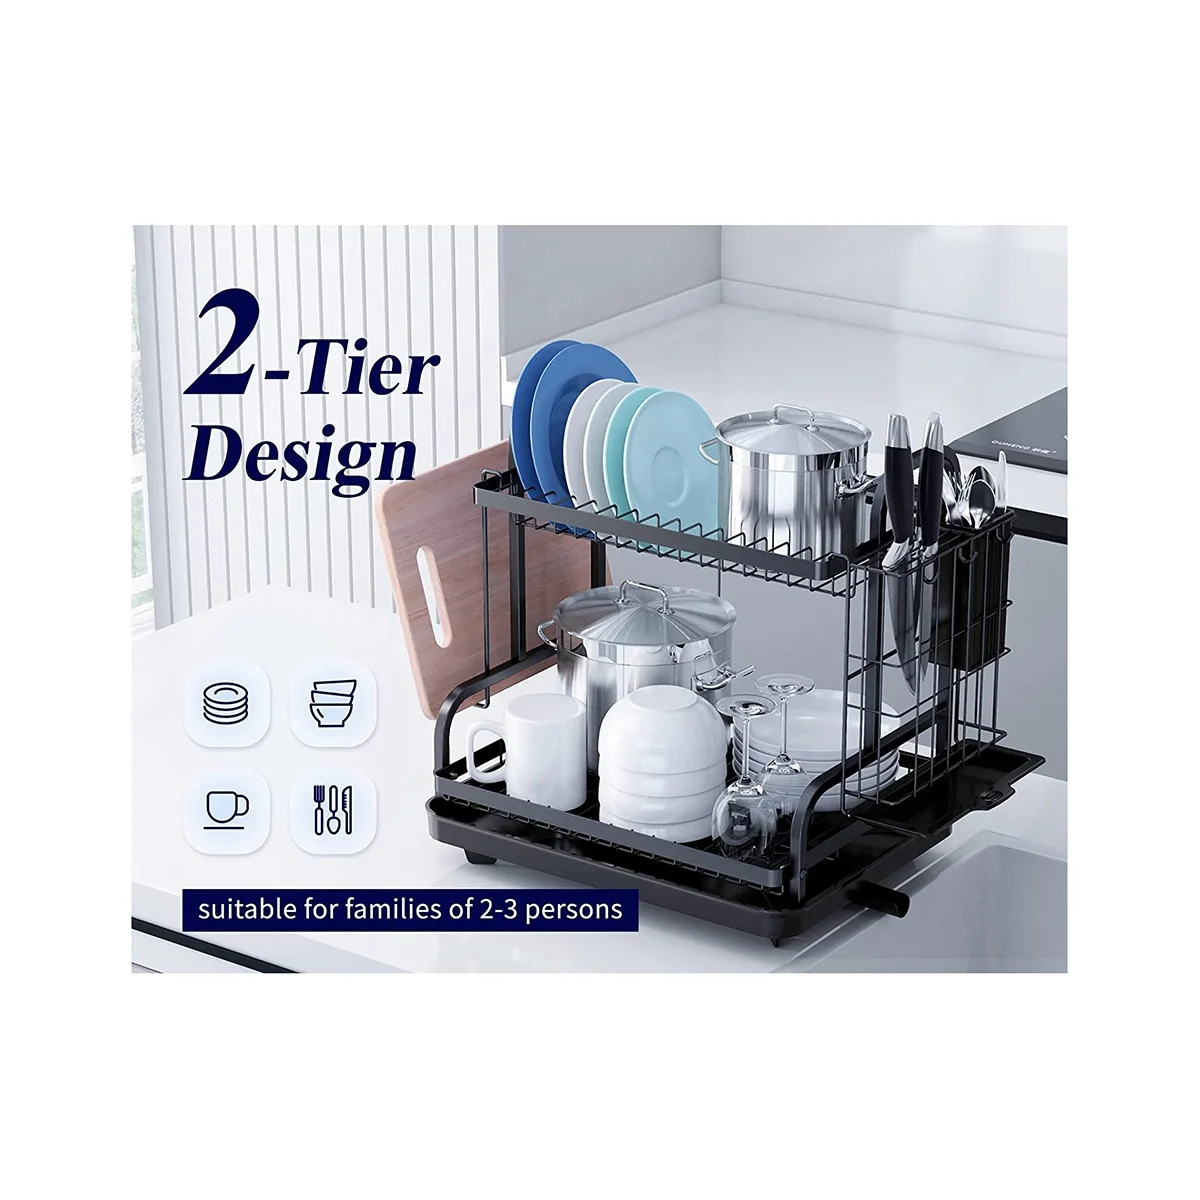 Dish Drying Rack,Multifunctional Dish Rack with Drainboard,Rustproof  Kitchen Dish Drying Rack with Utensil Holder, 2-Tier Dish D - AliExpress